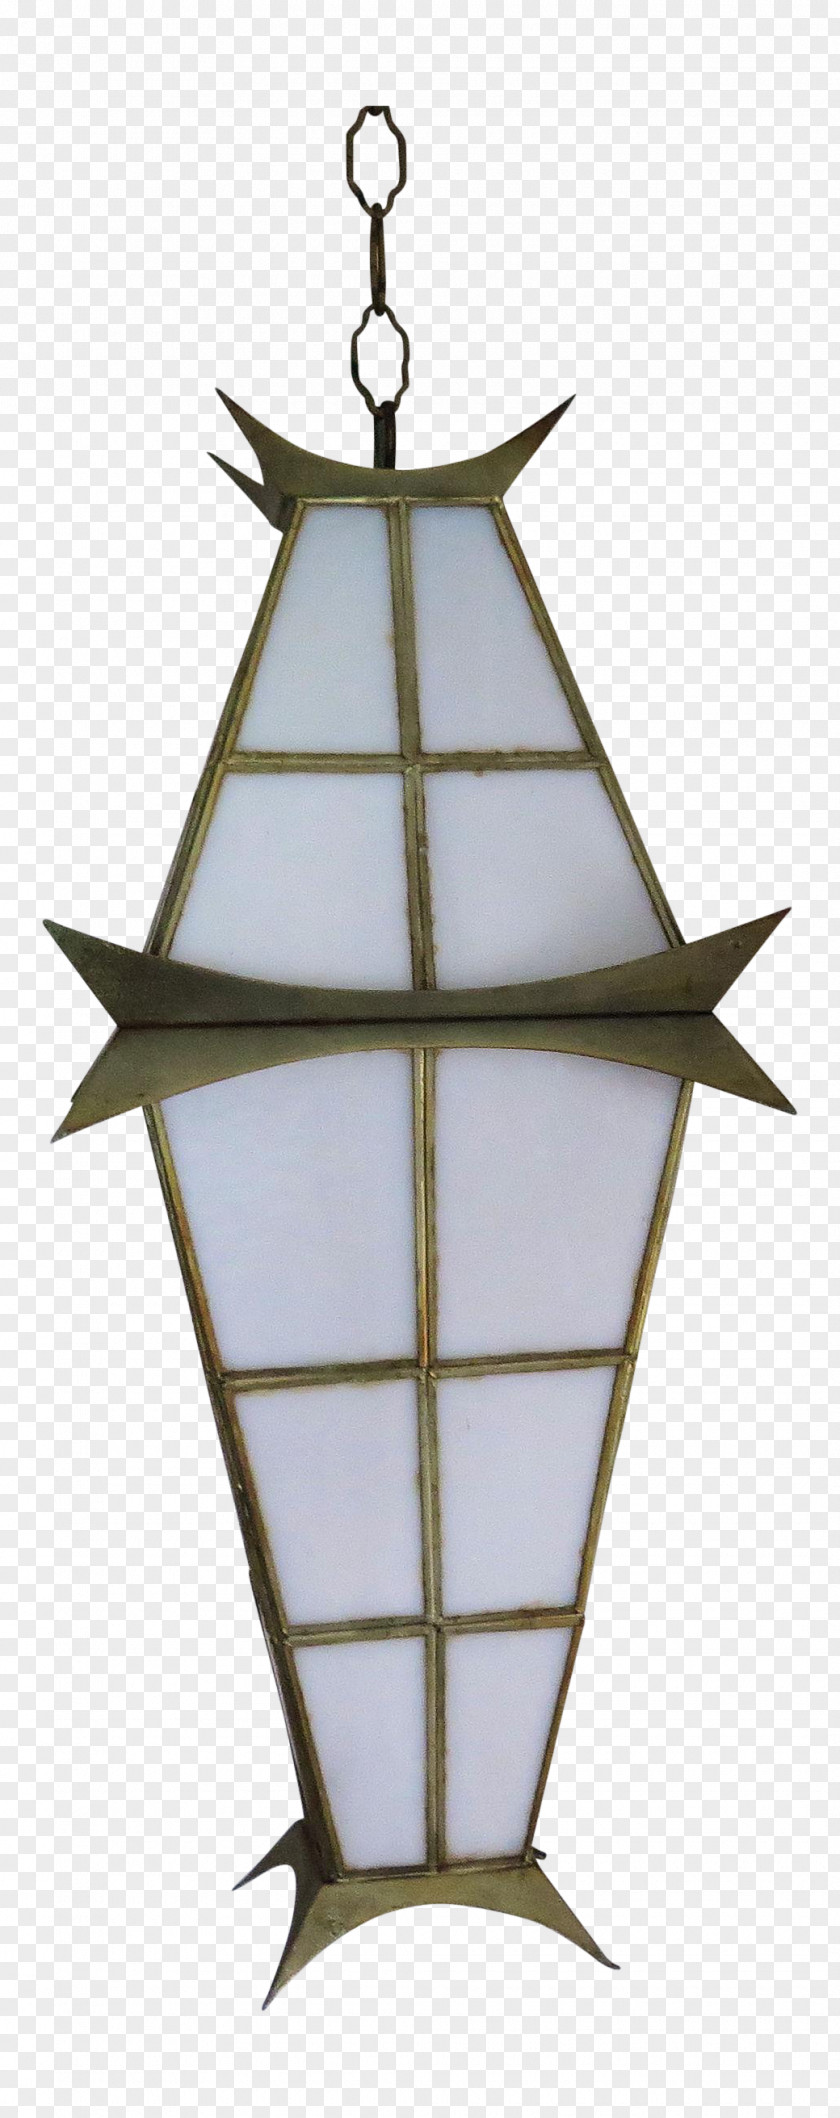 Simple Creative Stained Glass Chandelier Cafe Bar Light Fixture PNG